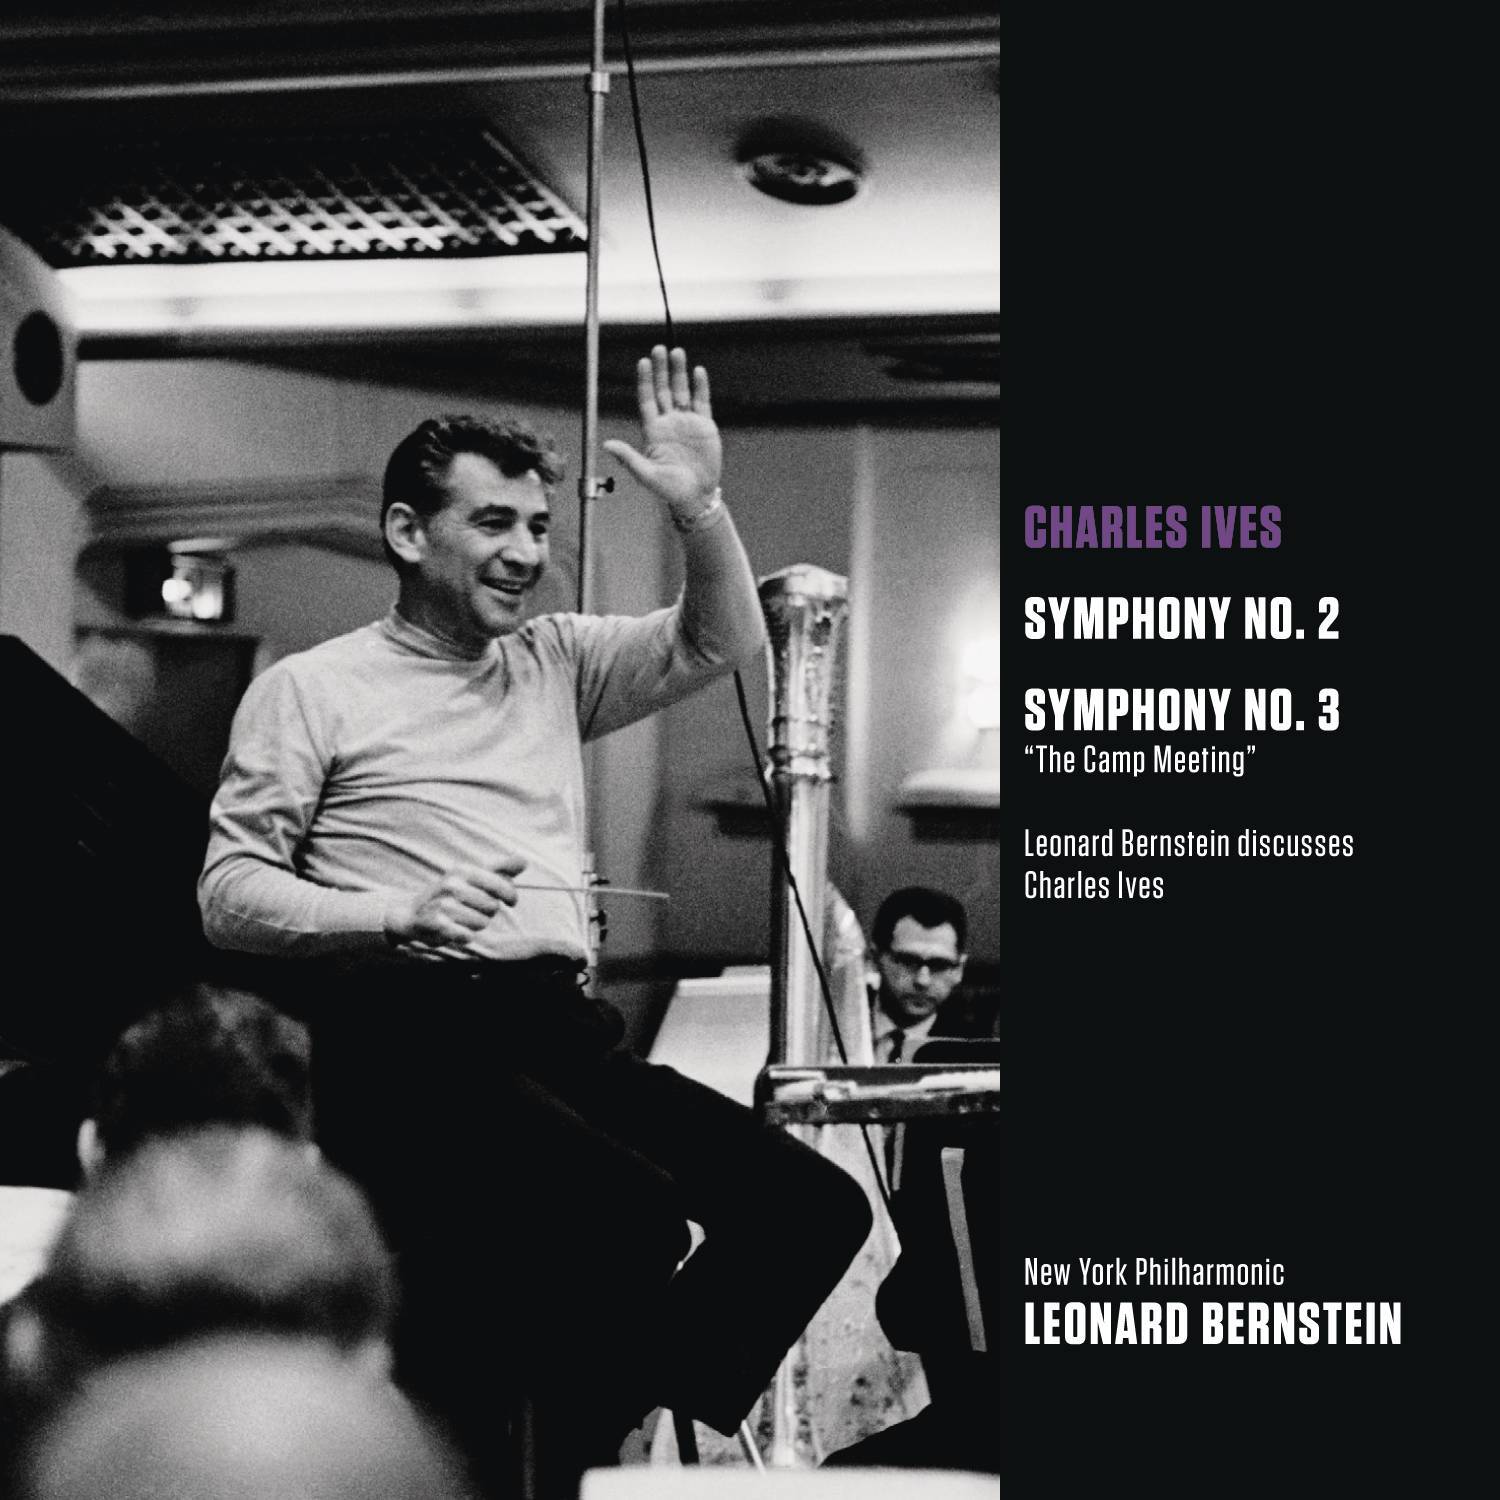 Ives: Symphony No. 2; Symphony No. 3 "The Camp Meeting" - Leonard Bernstein discusses Charles Ives专辑